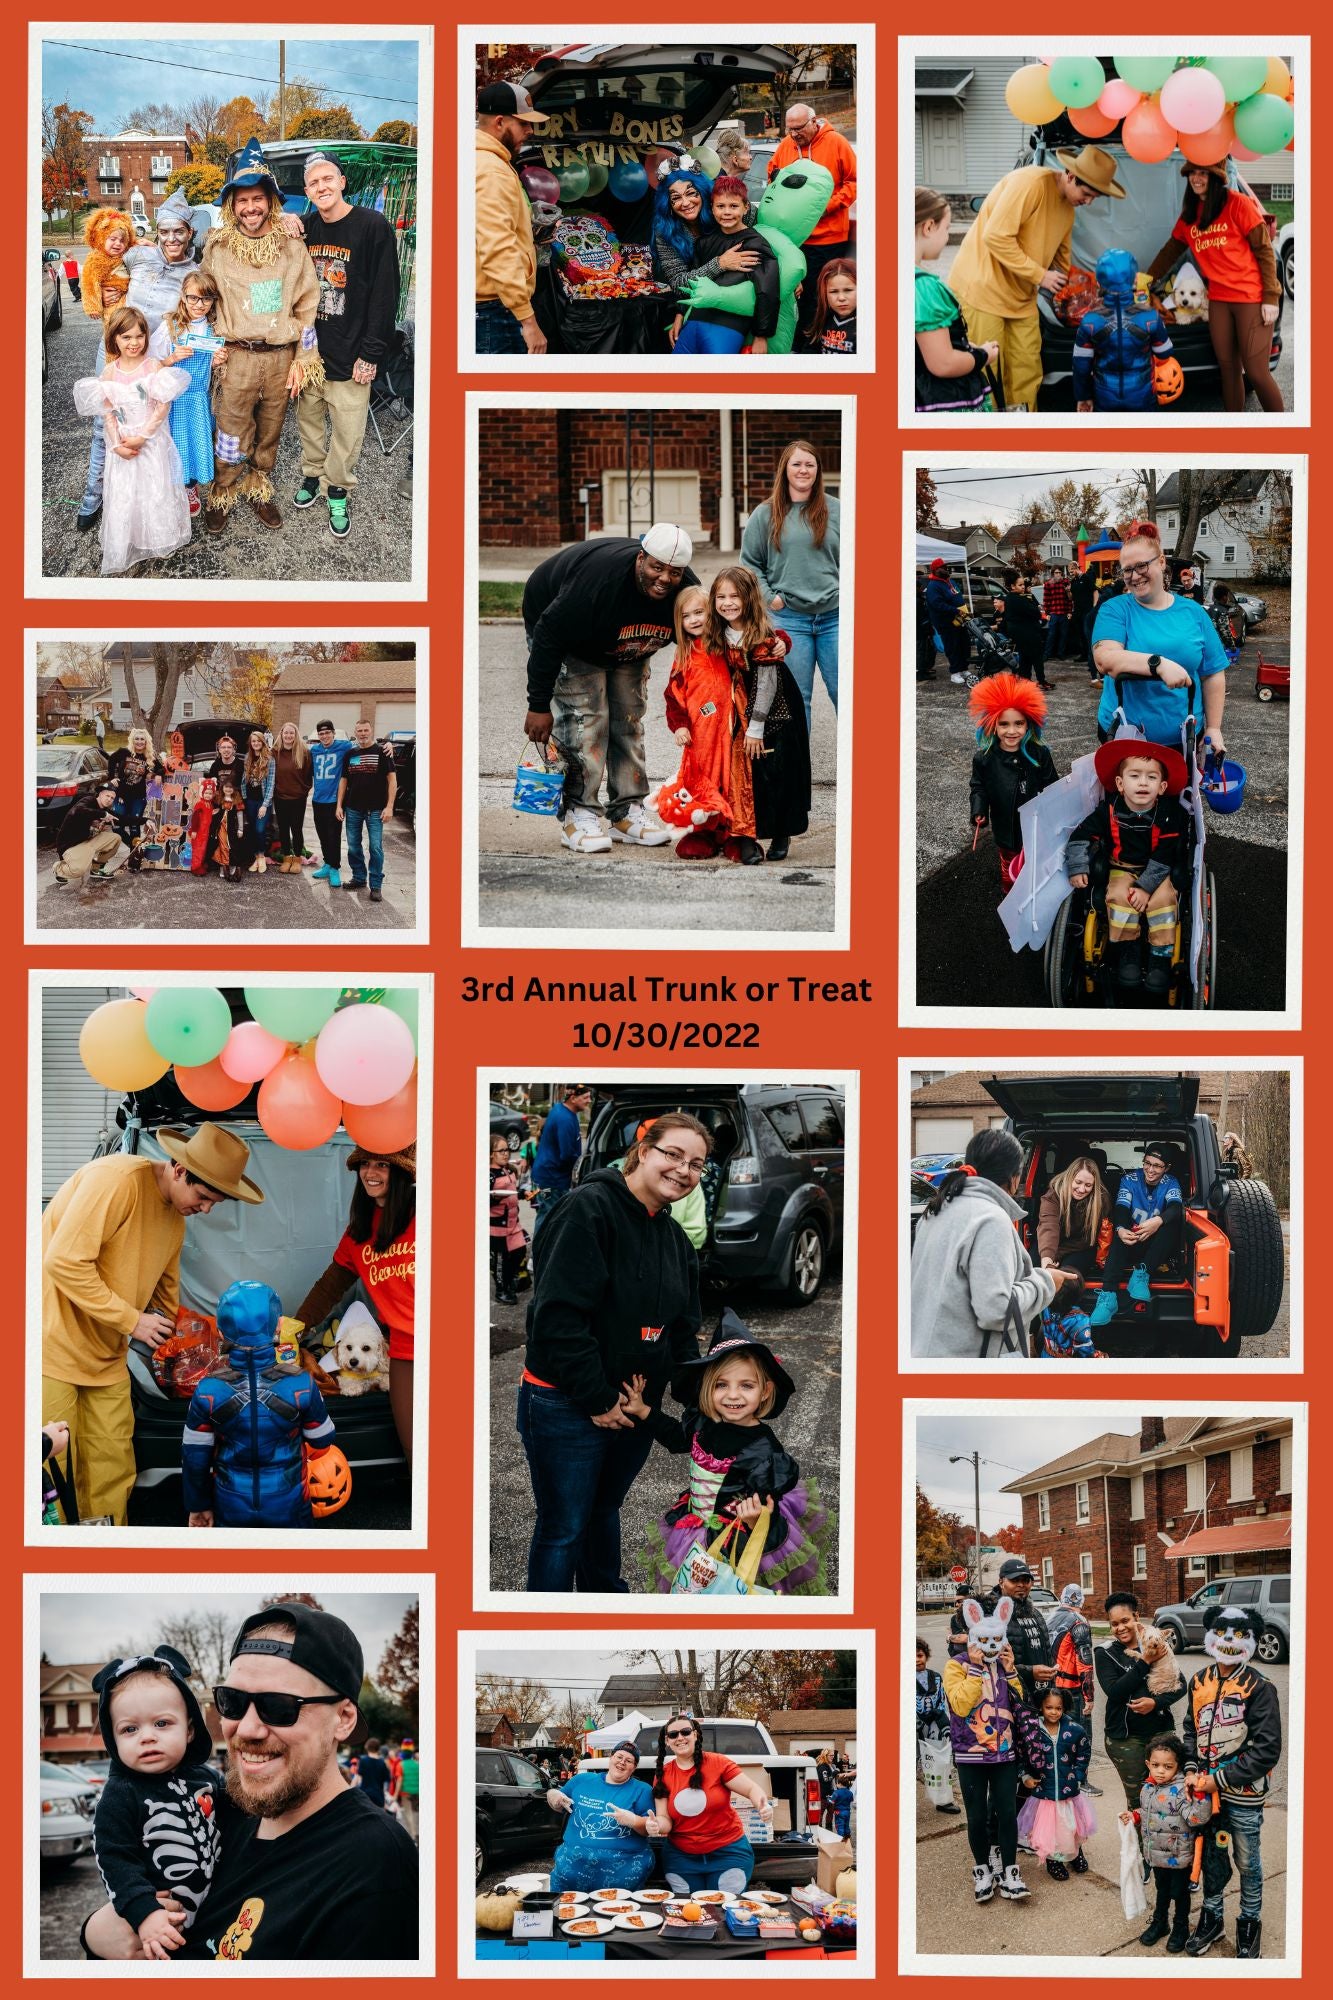 Flyer from Halloween 2022 Trunk or Treat showing a community gathering in Akron Ohio's Kenmore neighborhood including kids in costumes, adults handing out candy, car decorations and more.